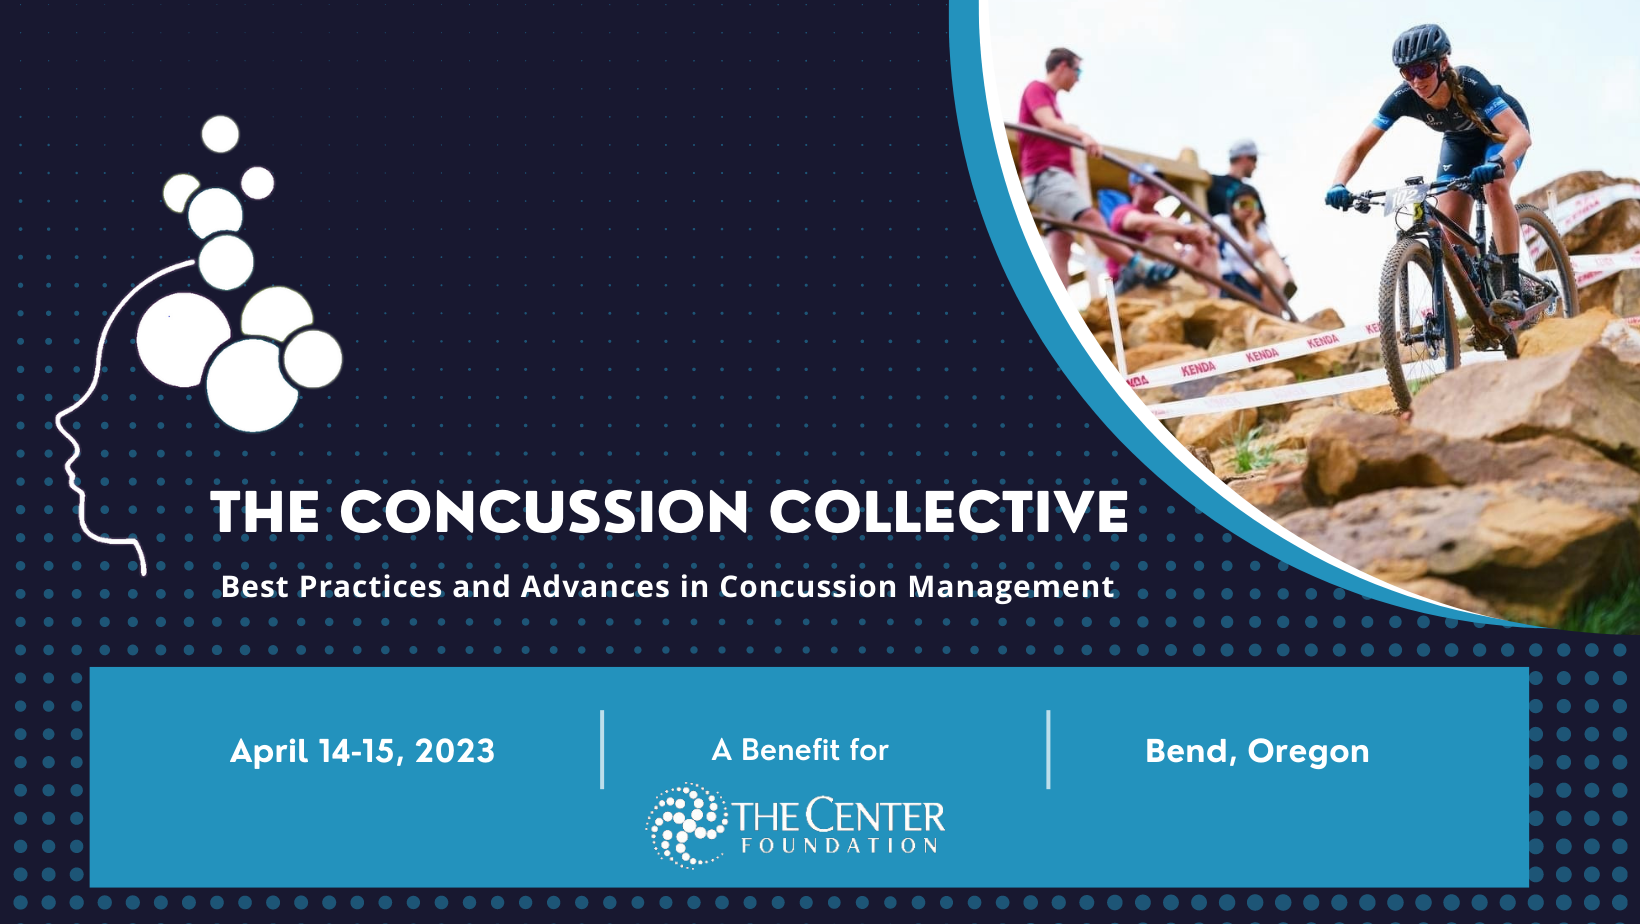 The Concussion Collective: Best Practices and Advances in Concussion Management